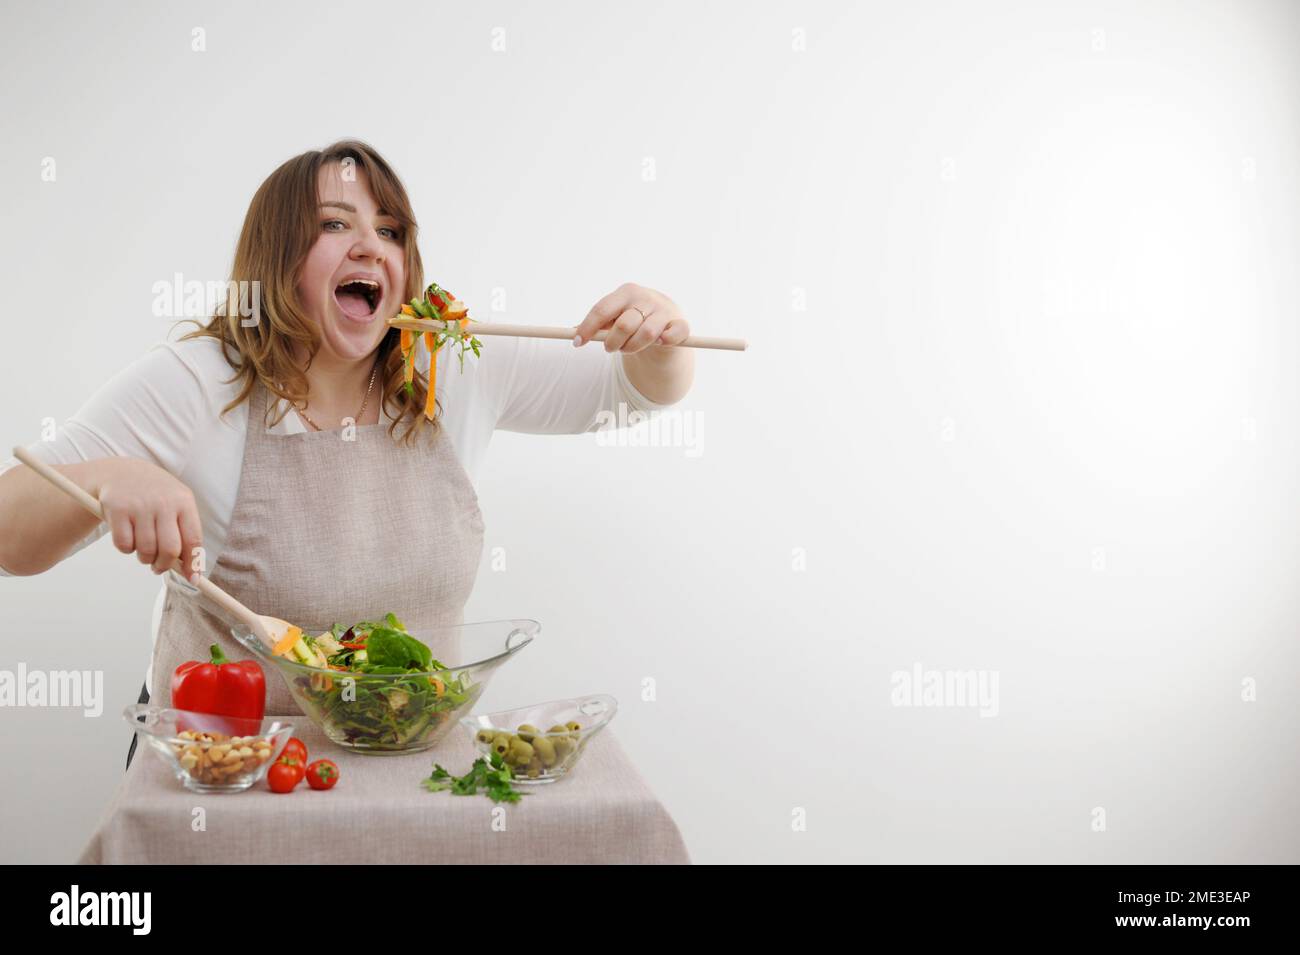 funny cheerful woman eating salad on white background she opens mouth wide bulges eyes large wooden spoon stuffs portion of food on table ingredients space for text weight loss ad Stock Photo